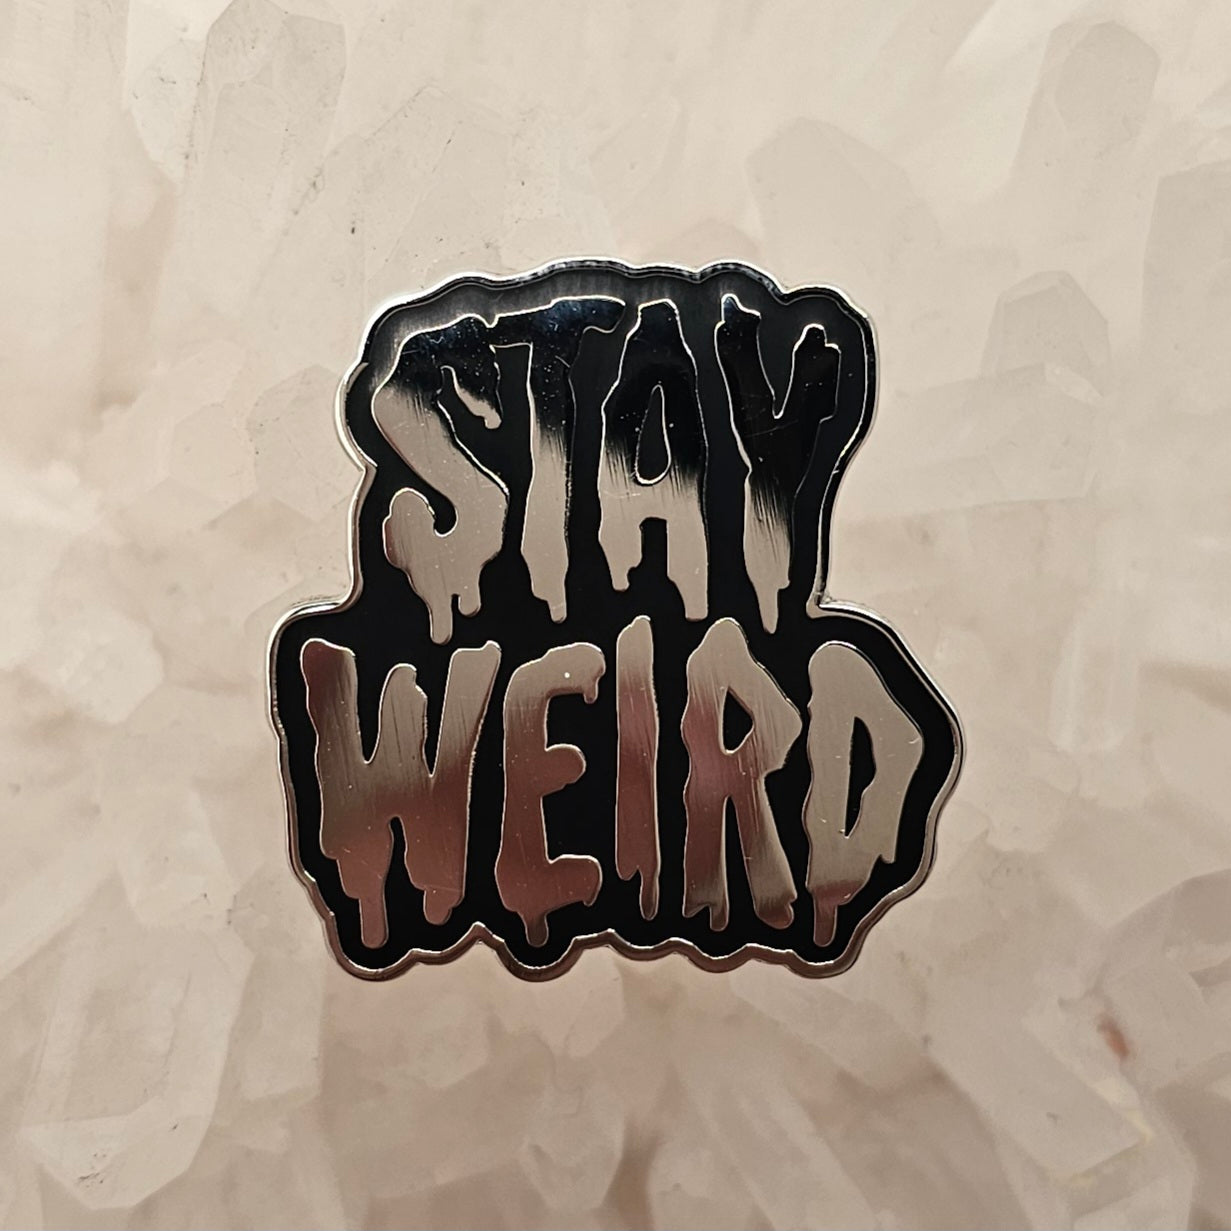 Stay Weird Polished Metal Enamel Pins Hat Pins Lapel Pin Brooch Badge Festival Pin